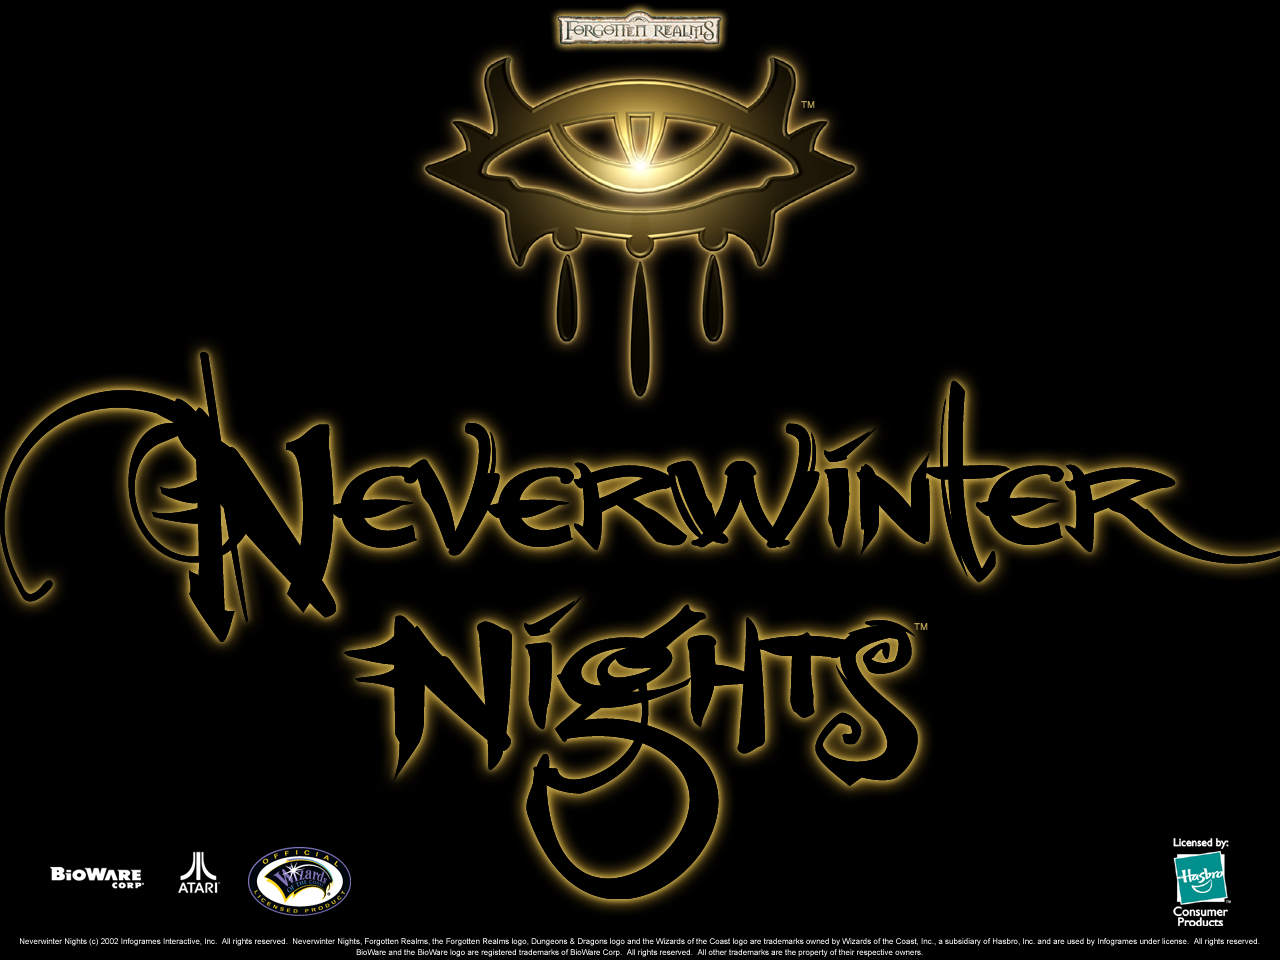 Neverwinter nights in steam фото 58